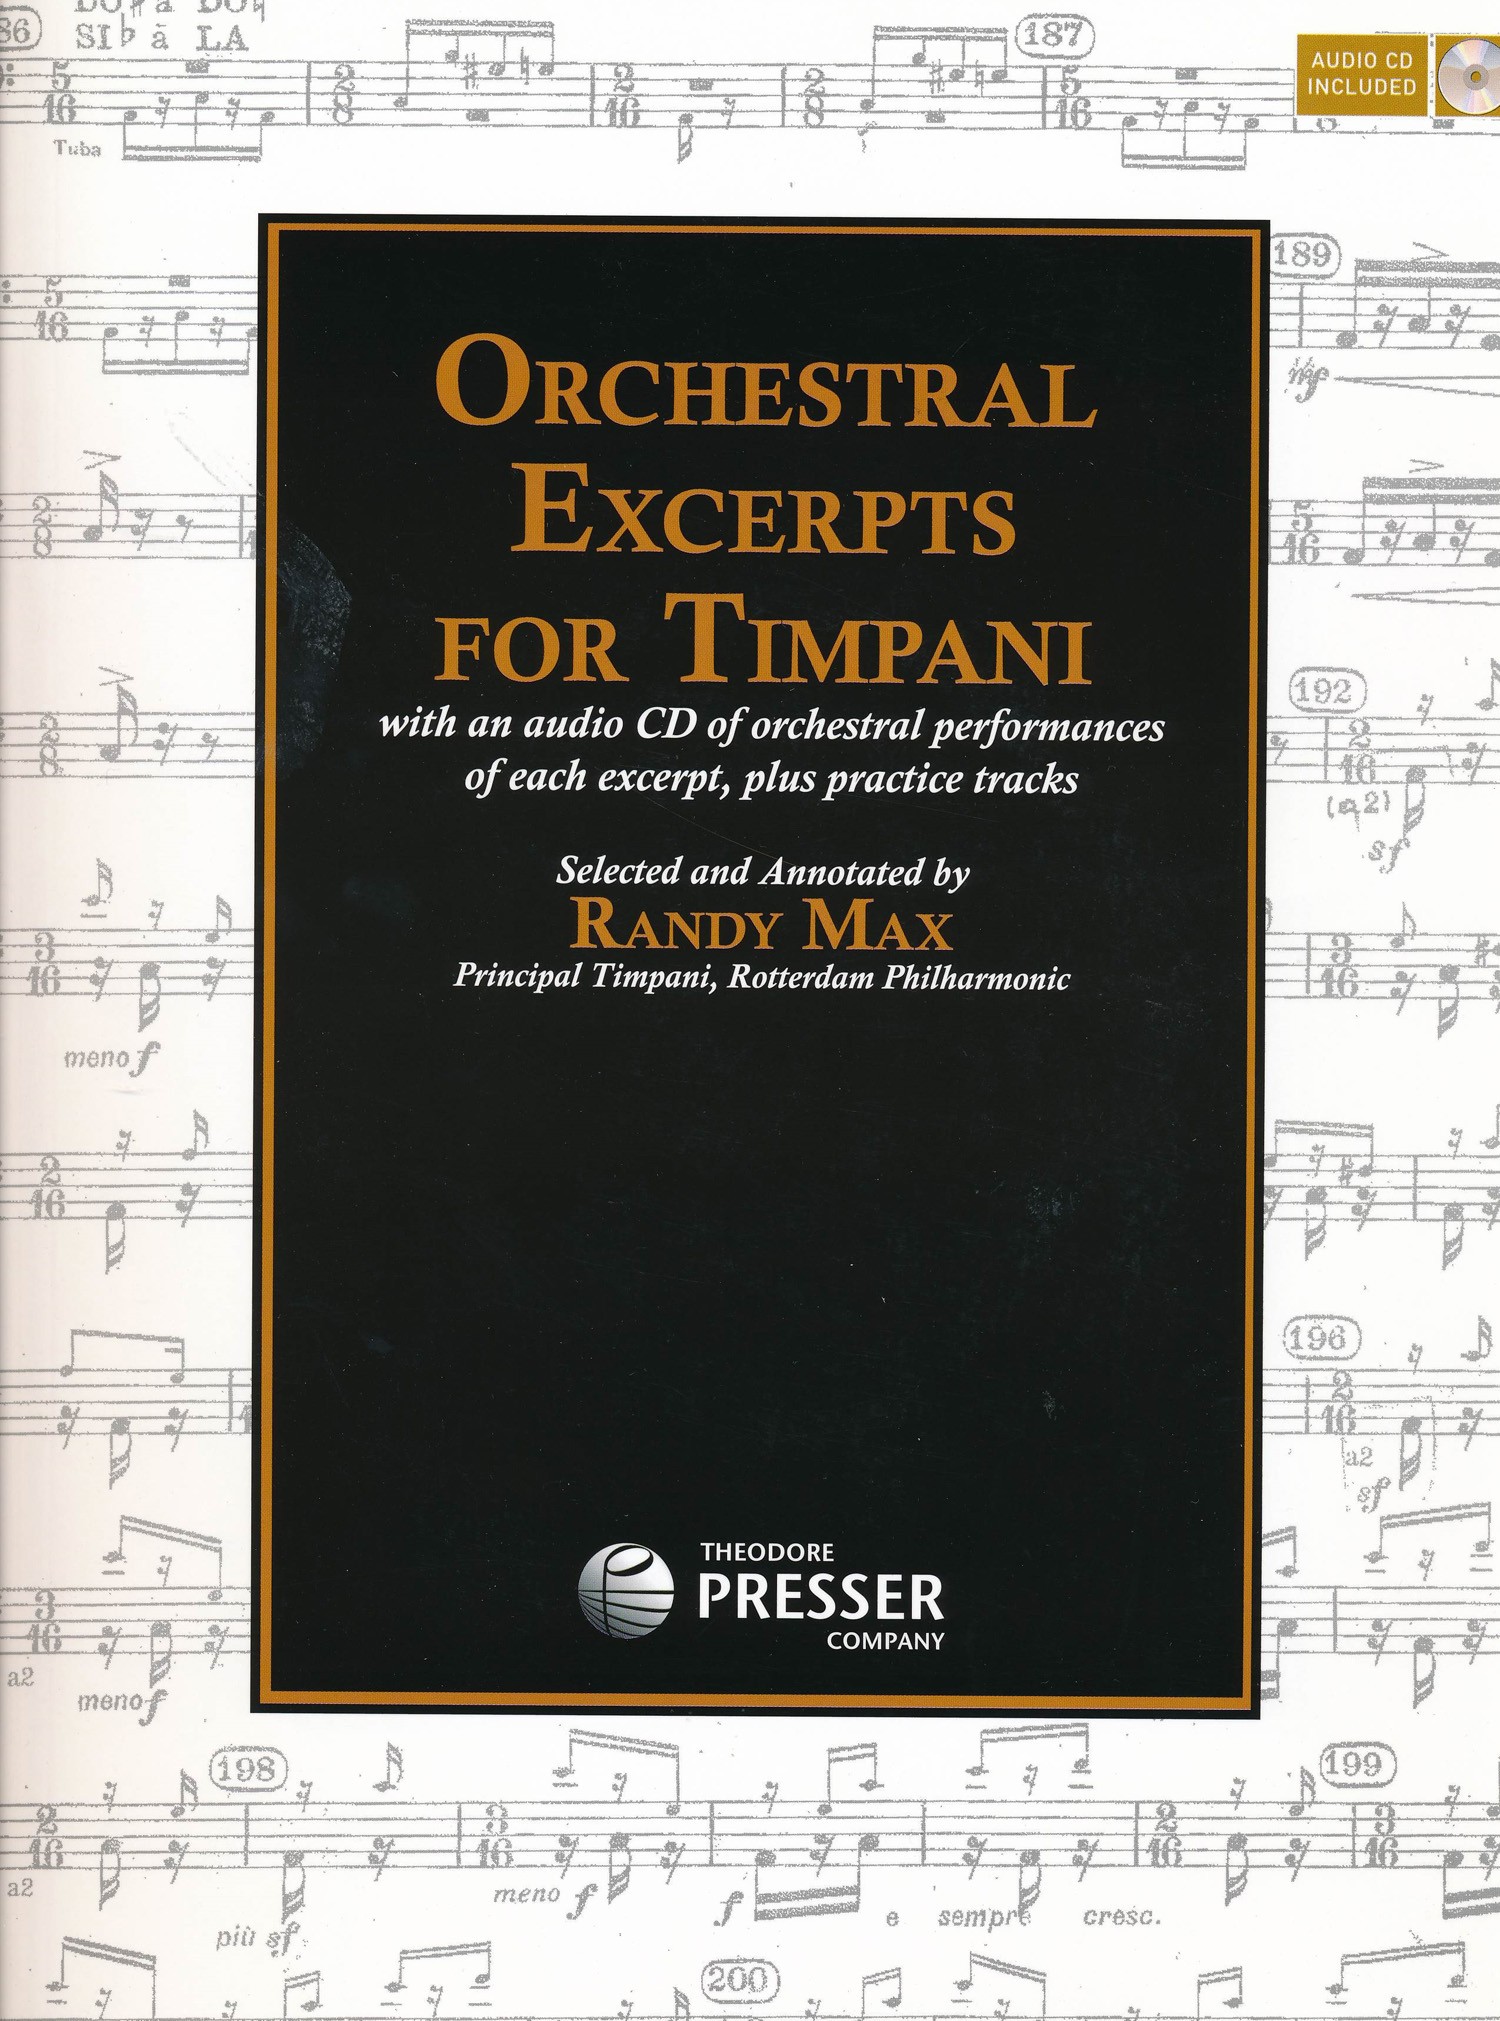 Orchestral Excerpts for Timpani